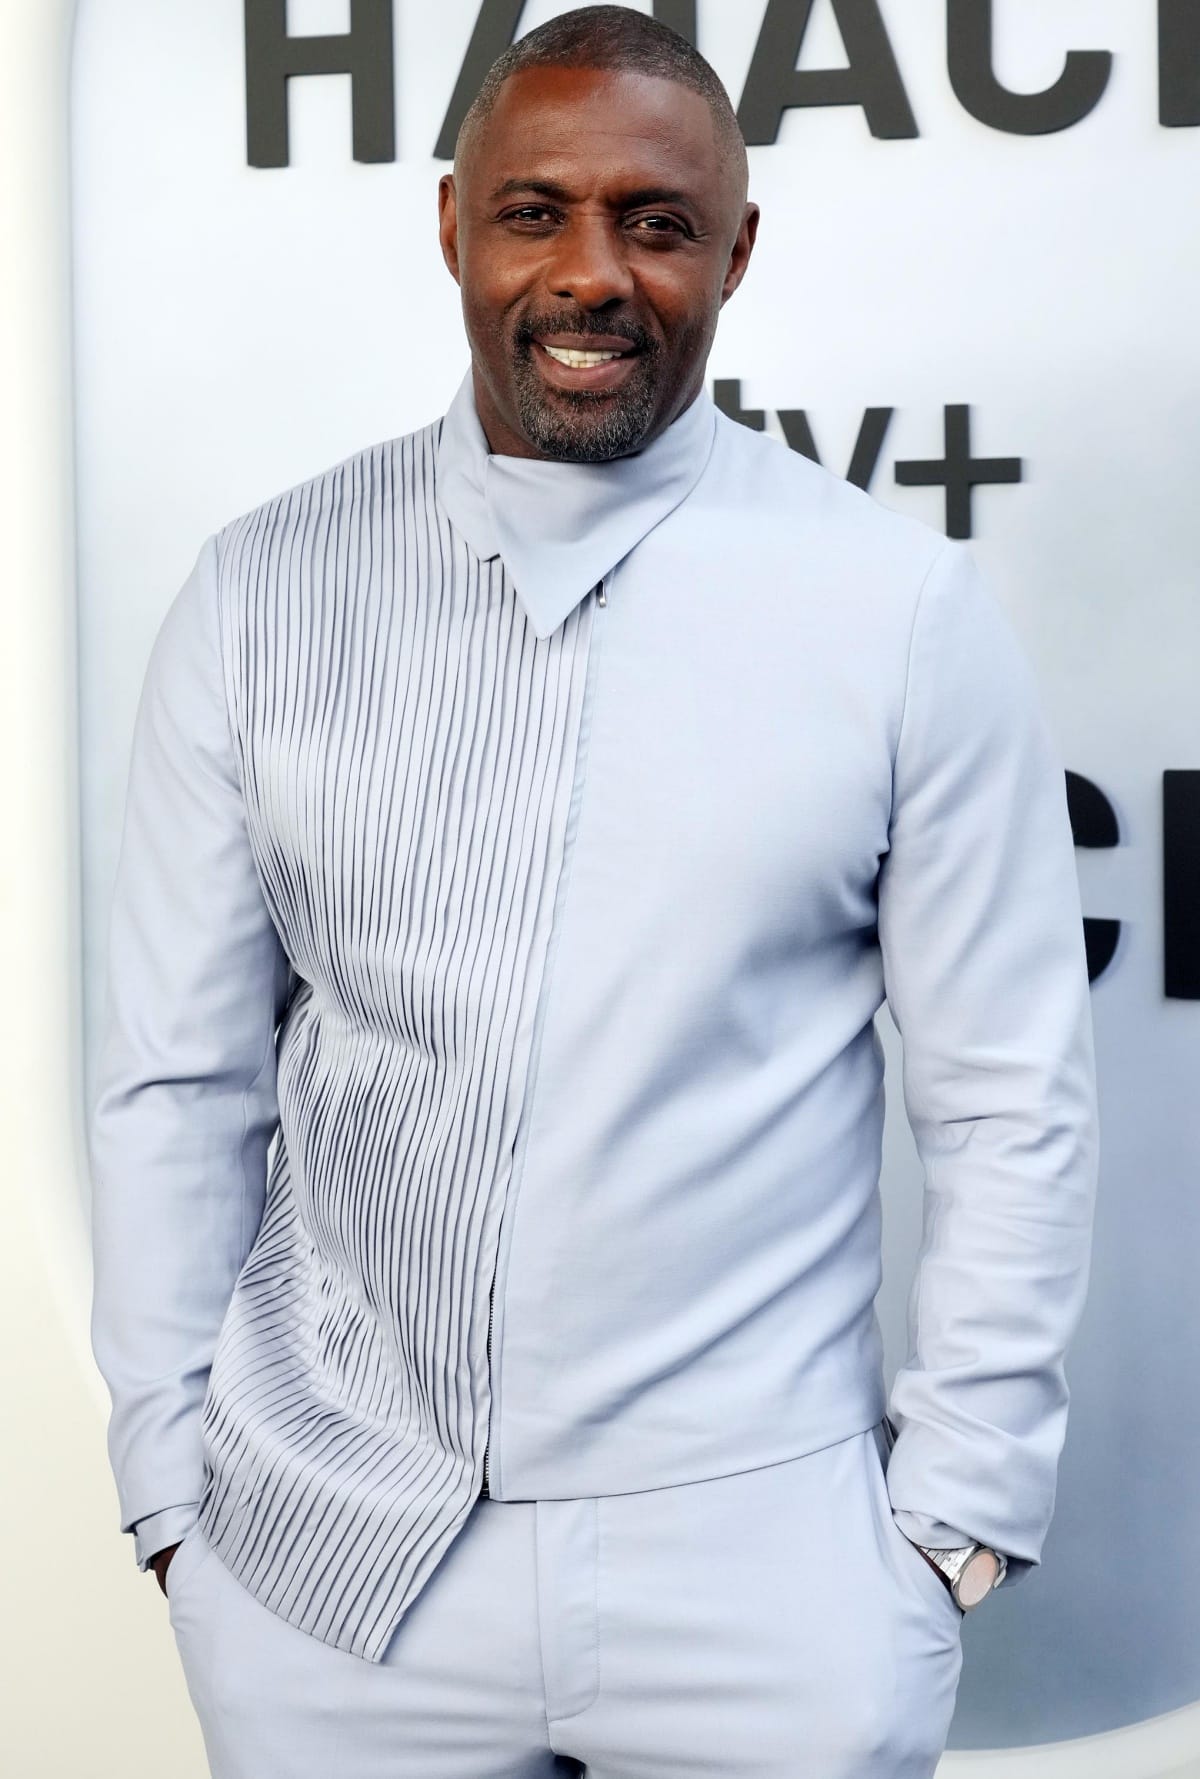 The Love Story of Idris Elba and Sabrina Dhowre: Age Gap, Height ...